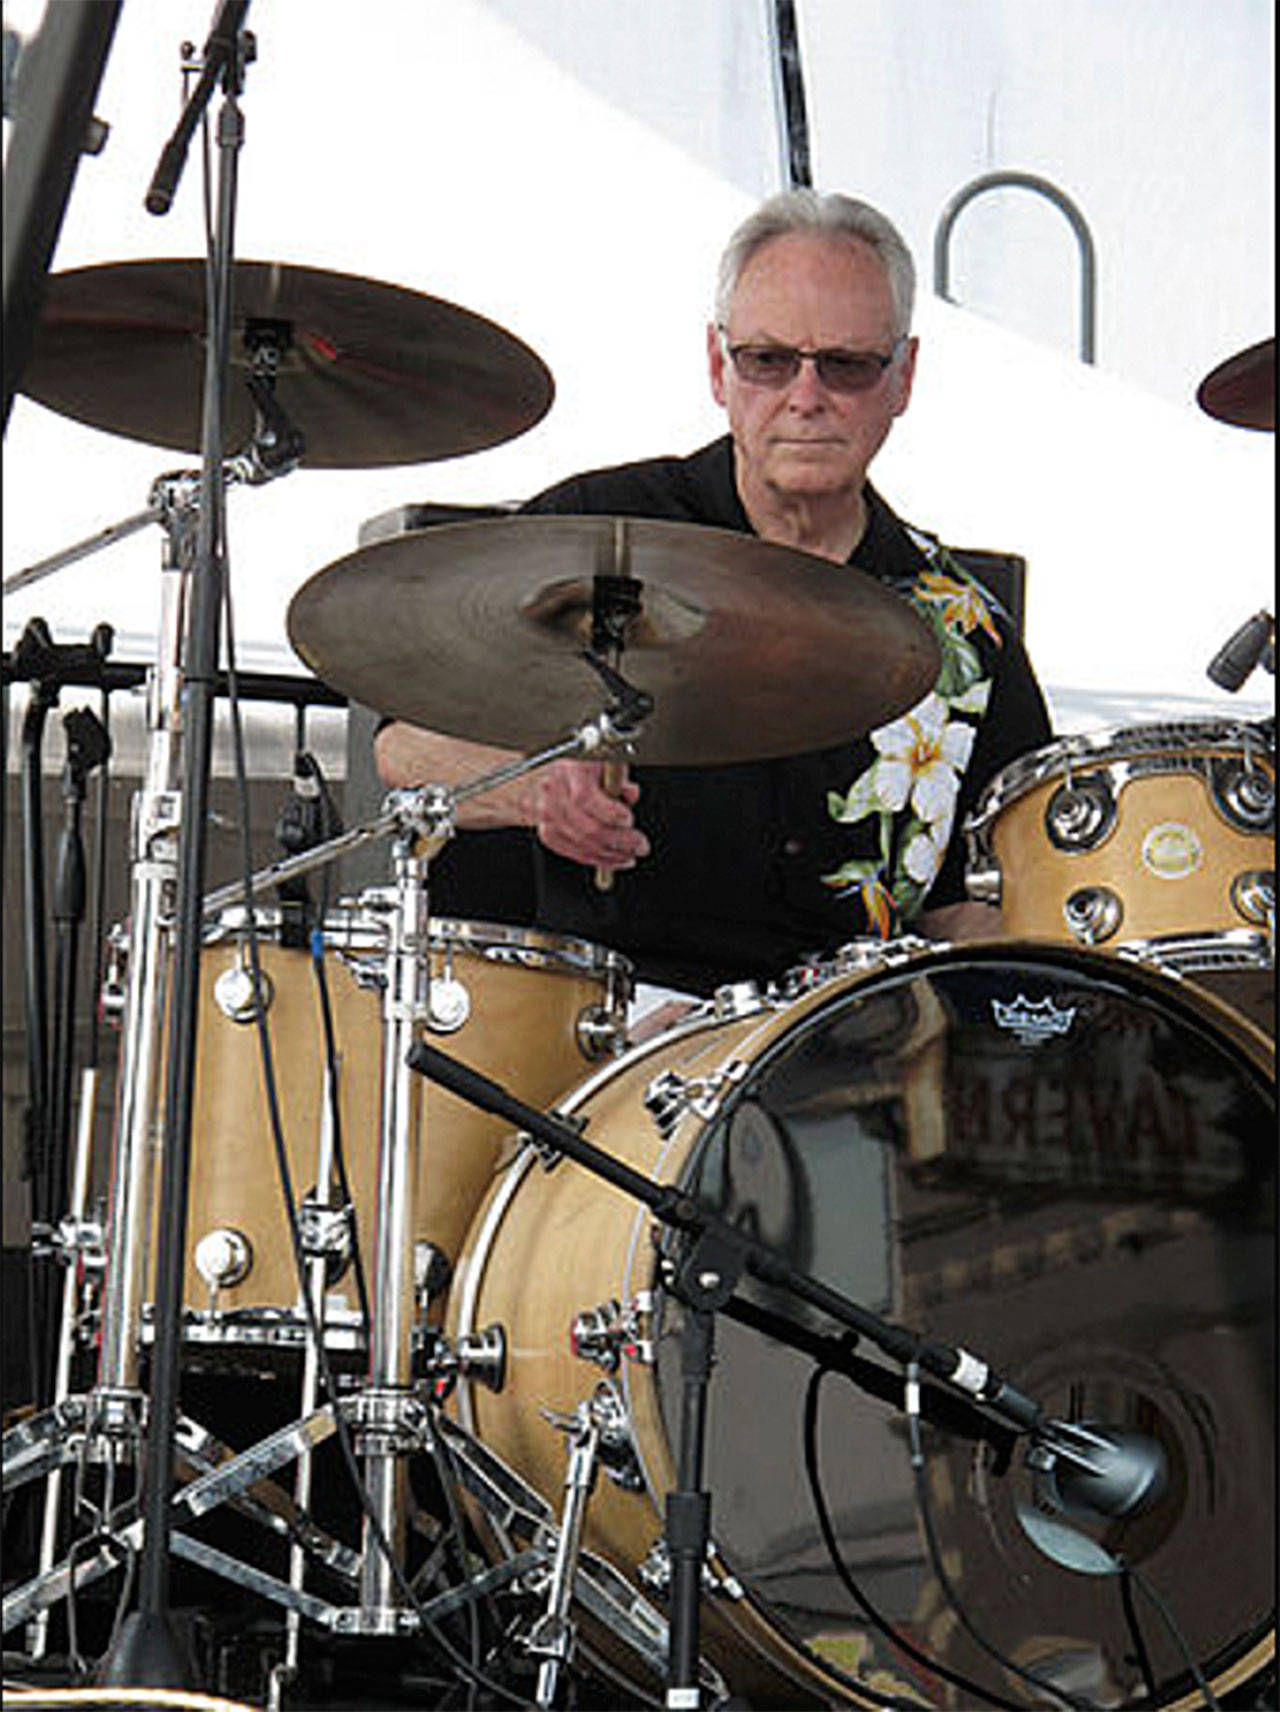 Contributed photo — Ken Bloomquist drums during a past Oak Harbor Music Festival.